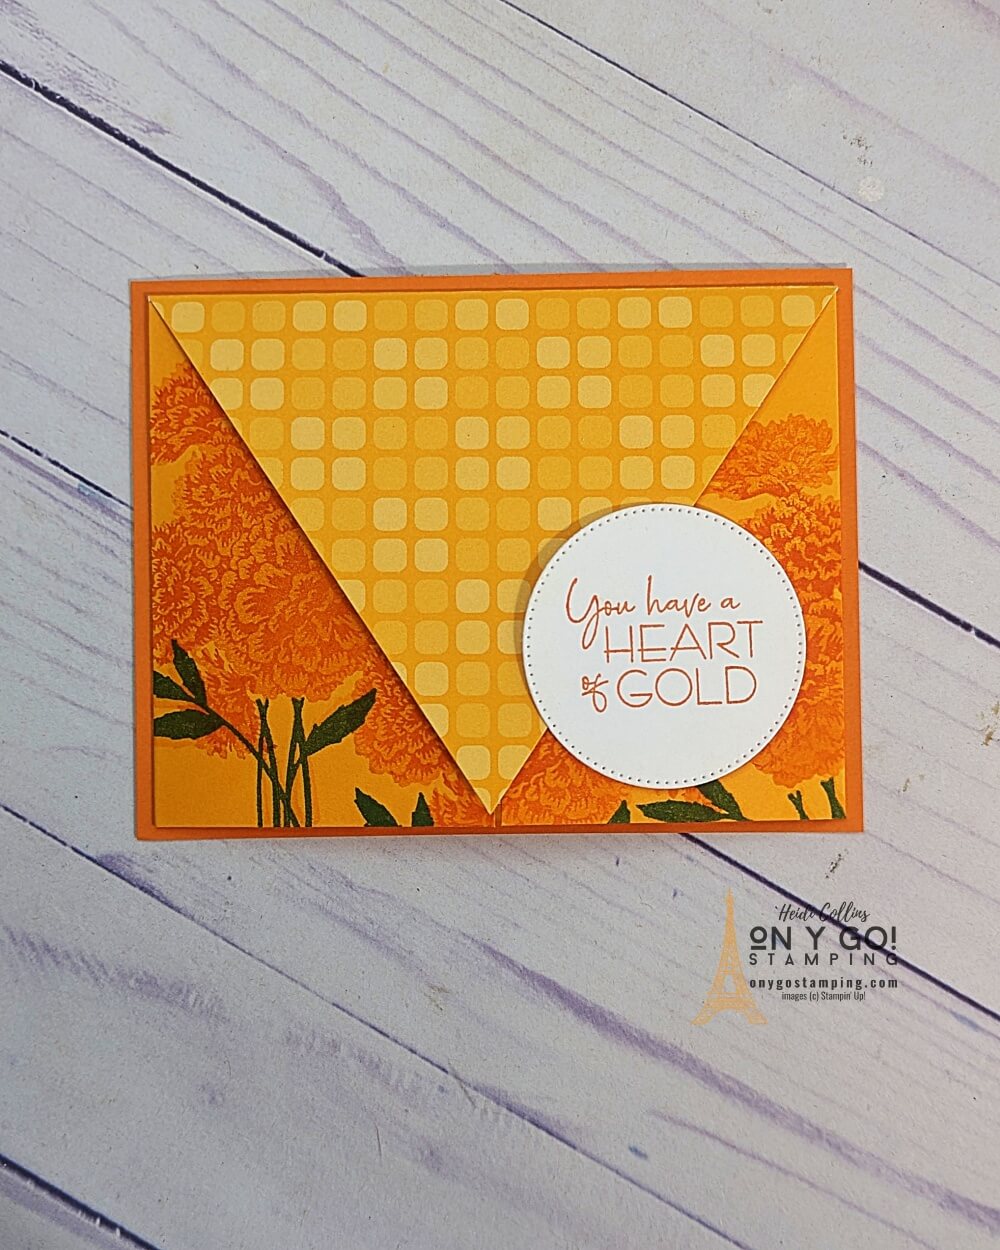 Every handmade card deserves a special touch, and the Marigold Moments stamp set is just the thing to add that special finish. With a variety of stamps and patterns, you can create a fun fold card with an envelope flap closure. Give your card the added charm of patterned paper and ribbon for the perfect combination of style and elegance. Make your cards one-of-a-kind with the Marigold Moments stamp set.